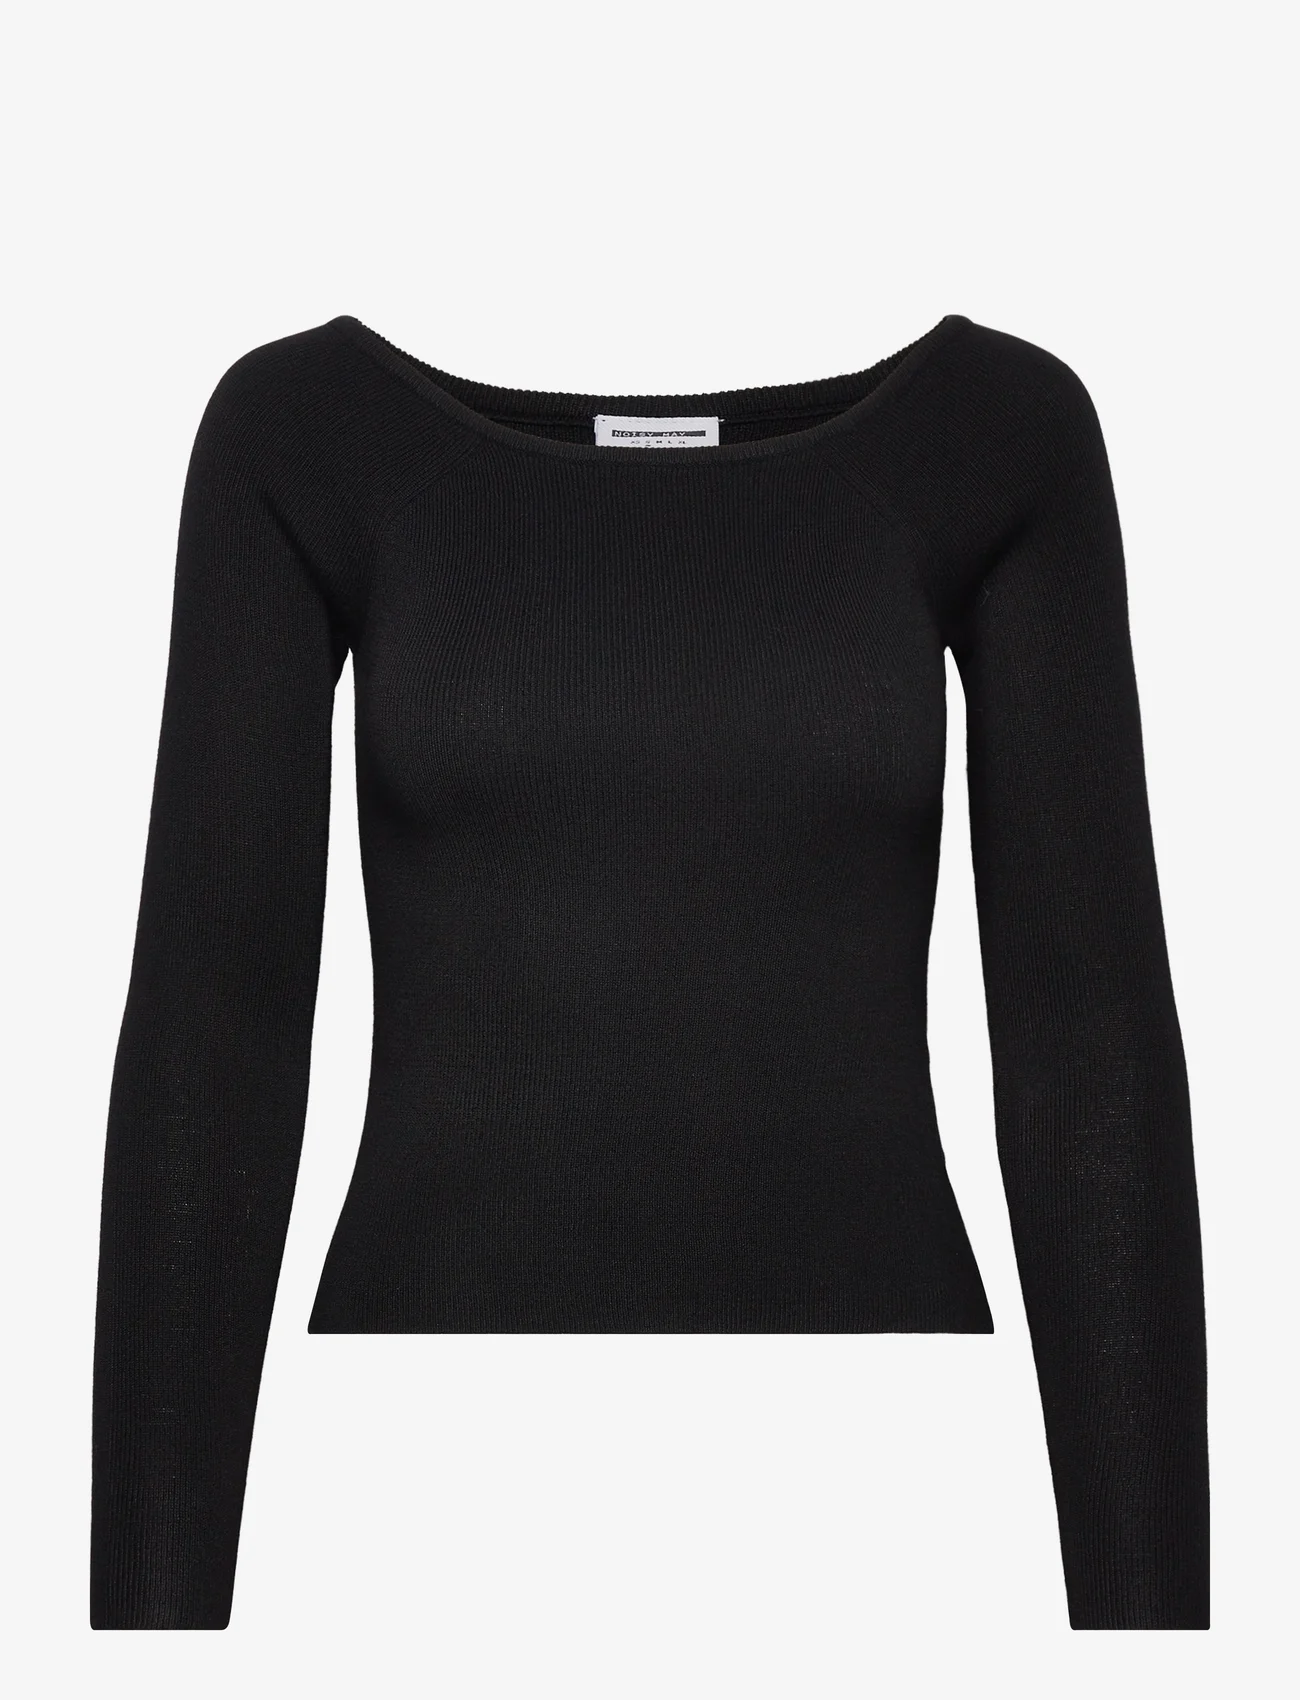 NOISY MAY - NMJAZ LS OFFSHOULDER KNIT TOP FWD LAB 2 - mažiausios kainos - black - 0